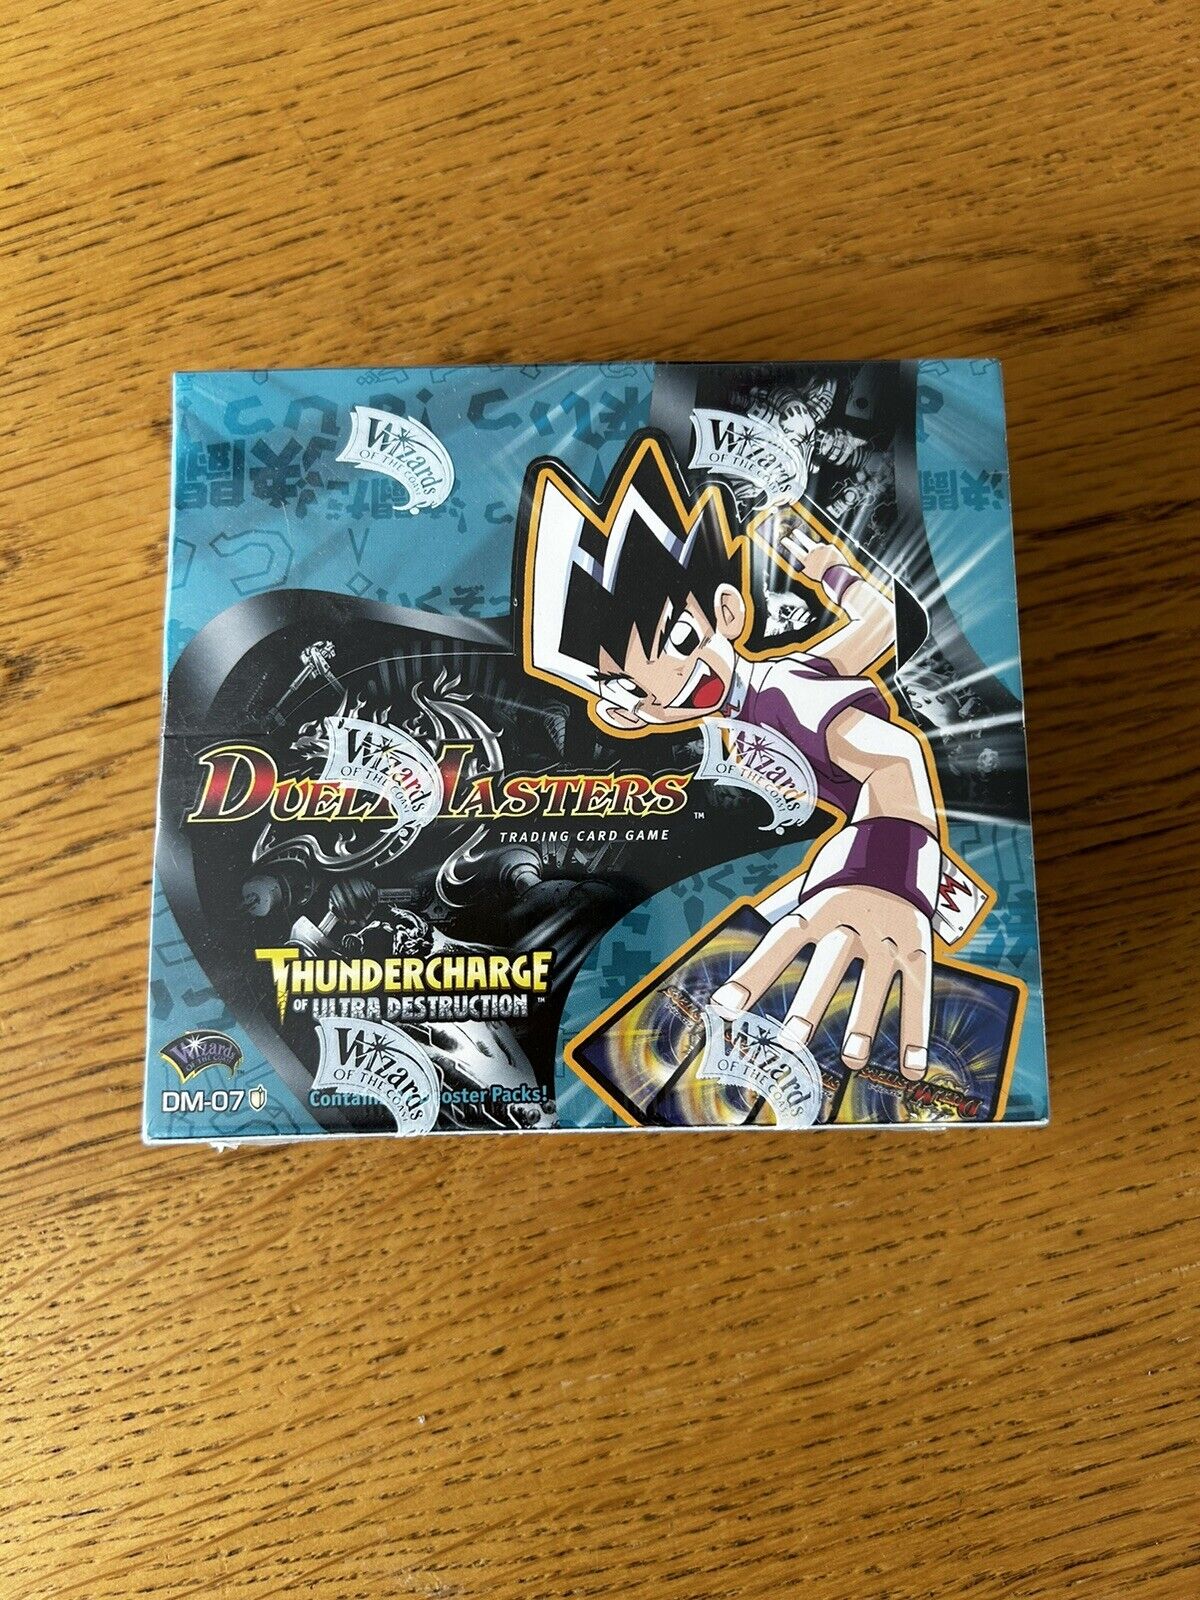 Duel Masters Thundercharge of Ultra Destruction DM-07 Booster Box Sealed Mint